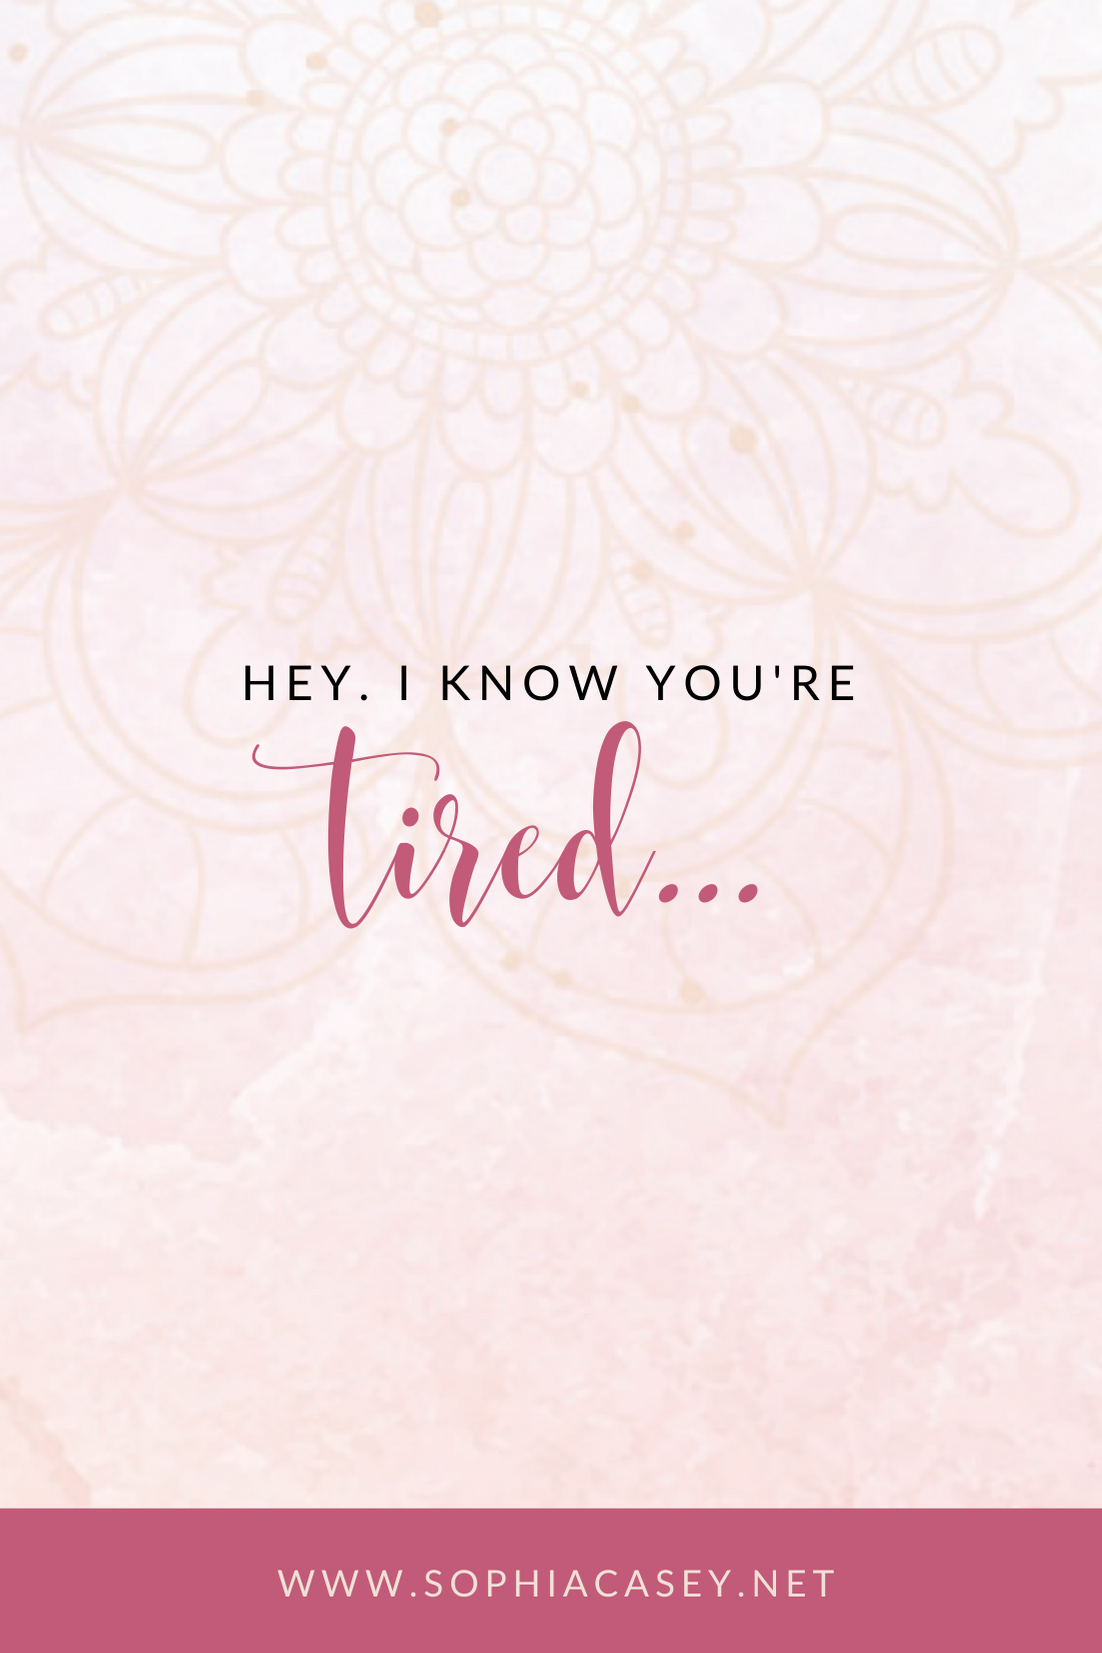 Hey. I Know You’re Tired…